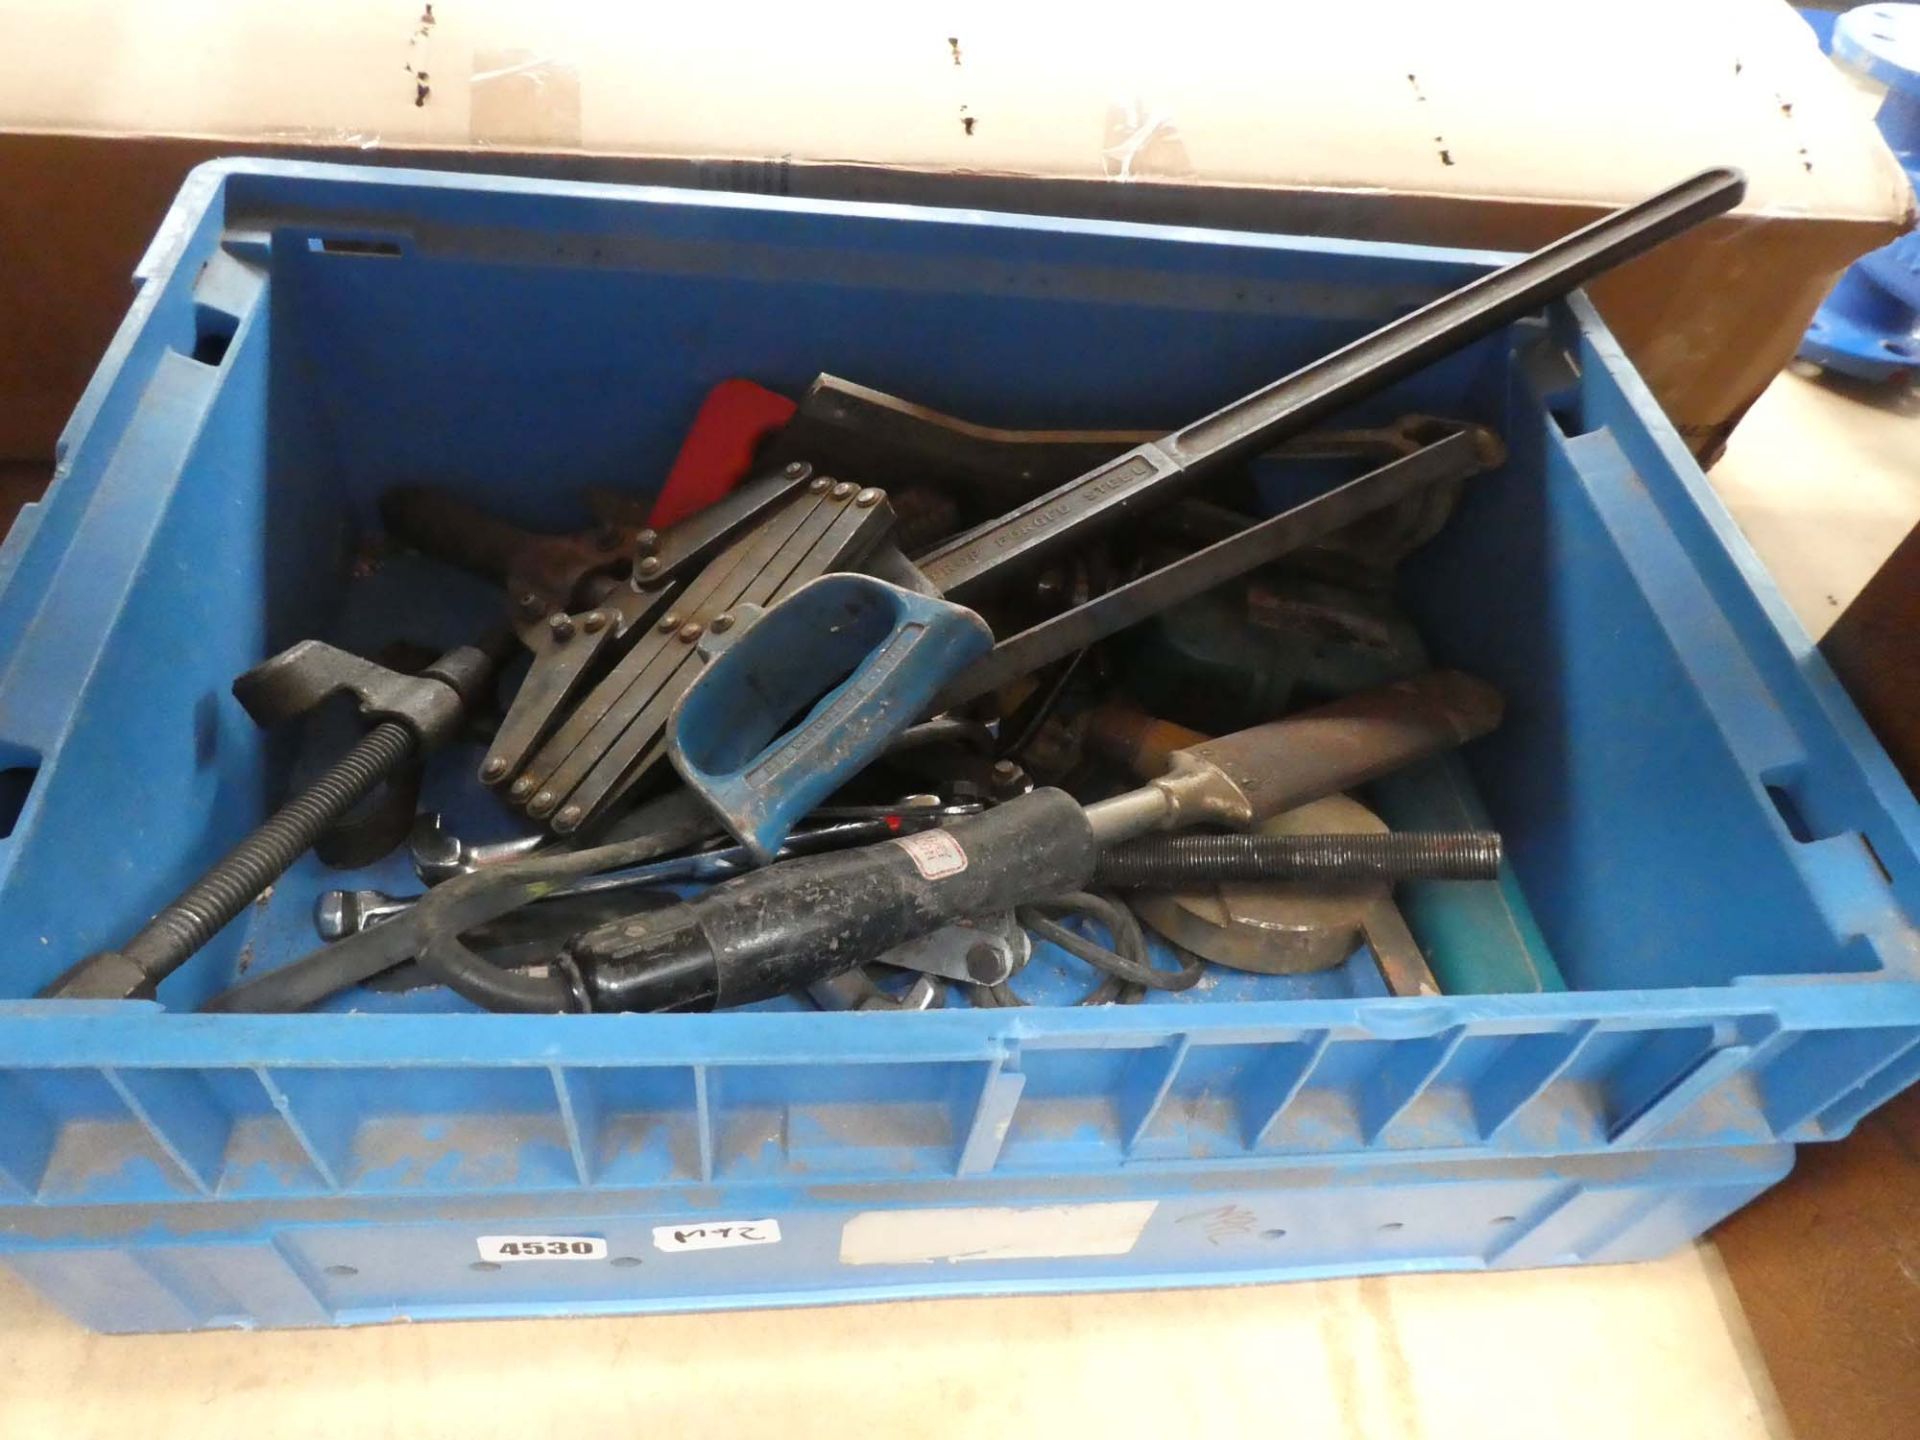 Small crate cont. tools inc. riveter, clamps, pullers, stillsons, etc.